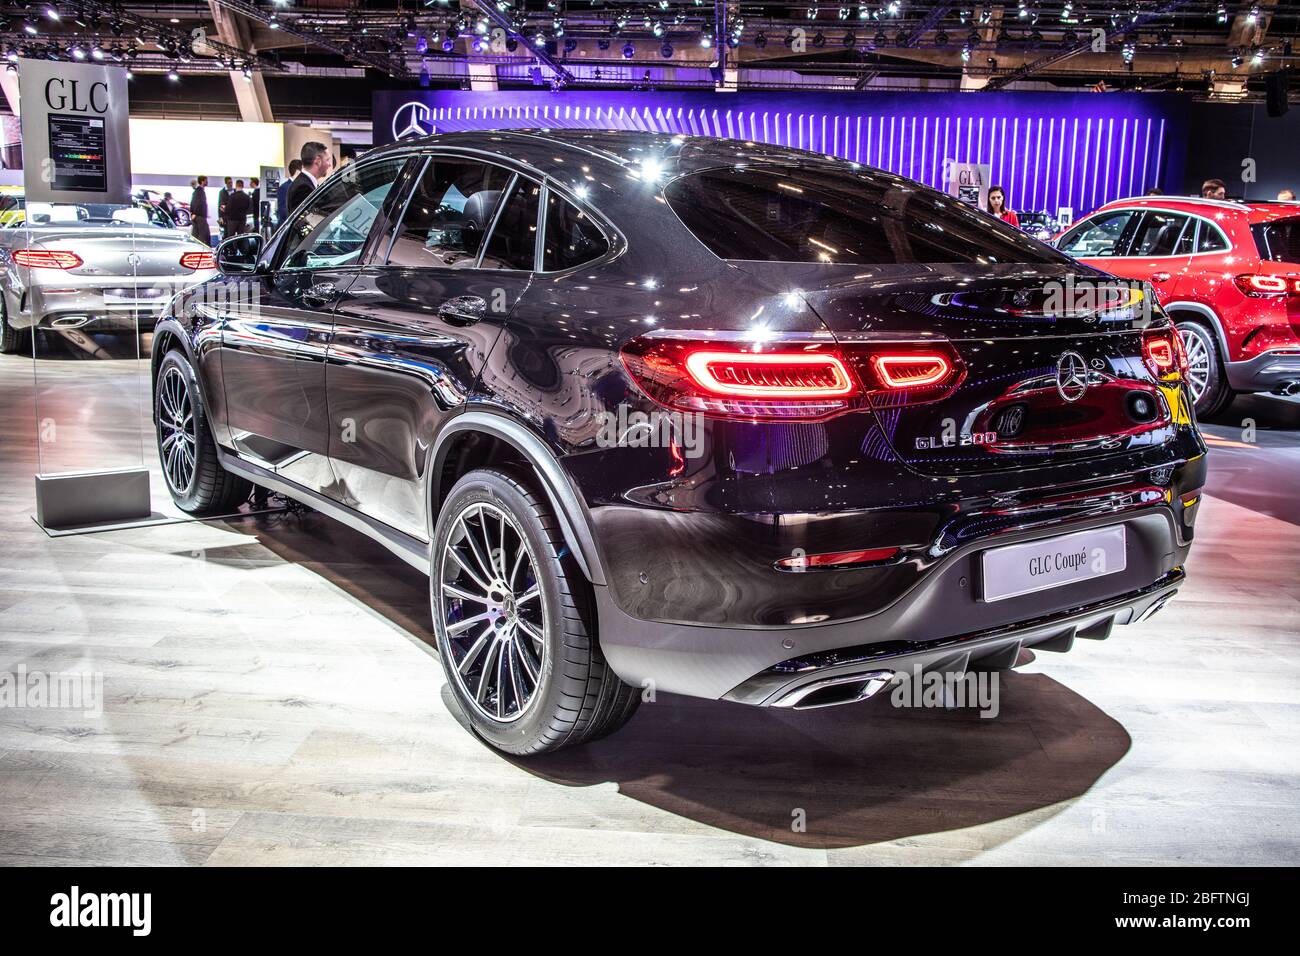 Mercedes GLC 220d 4Matic SUV at Brussels Motor Show, First